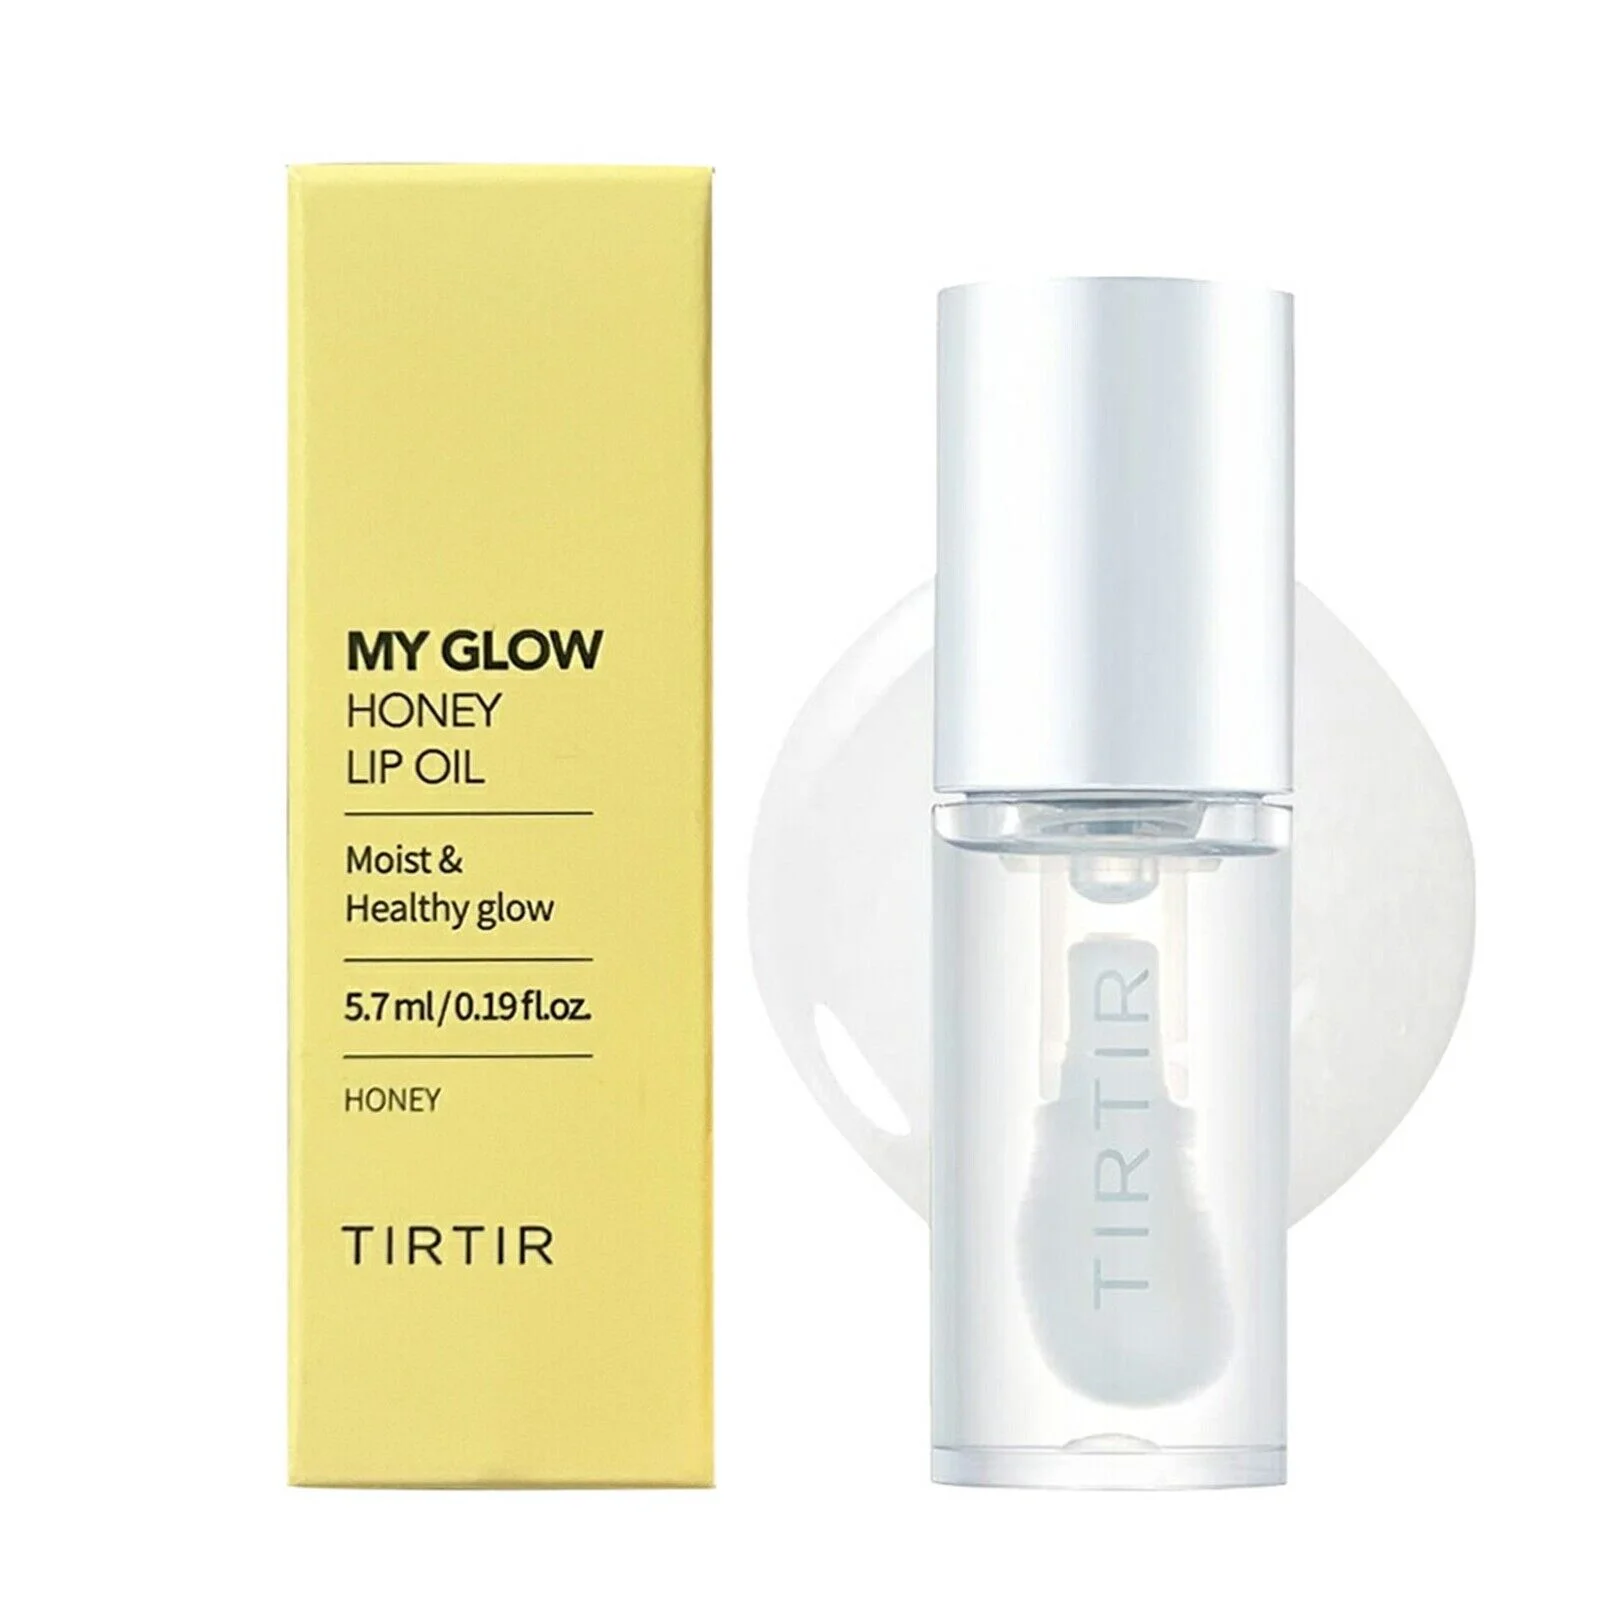 You are currently viewing Tirtir Lip Oil Review: Scam or Legit? An In-depth Examination